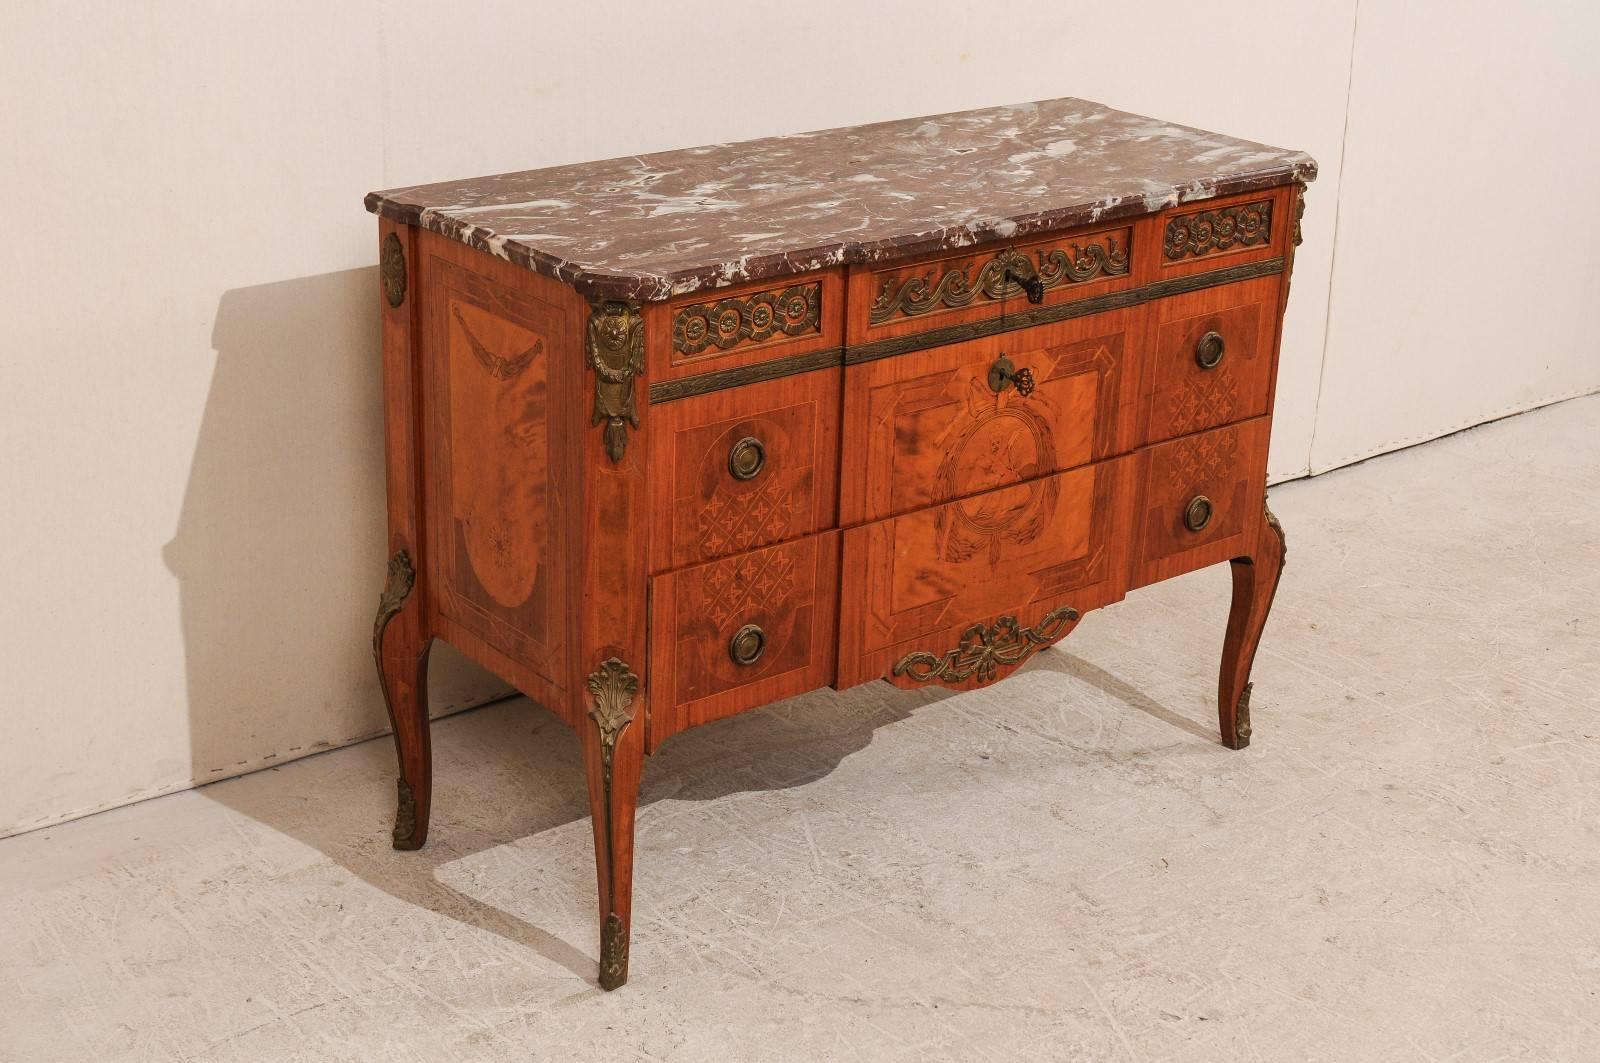 Inlay Swedish Mid-20th Century Gustavian Style Three-Drawer Chest with Mable Top